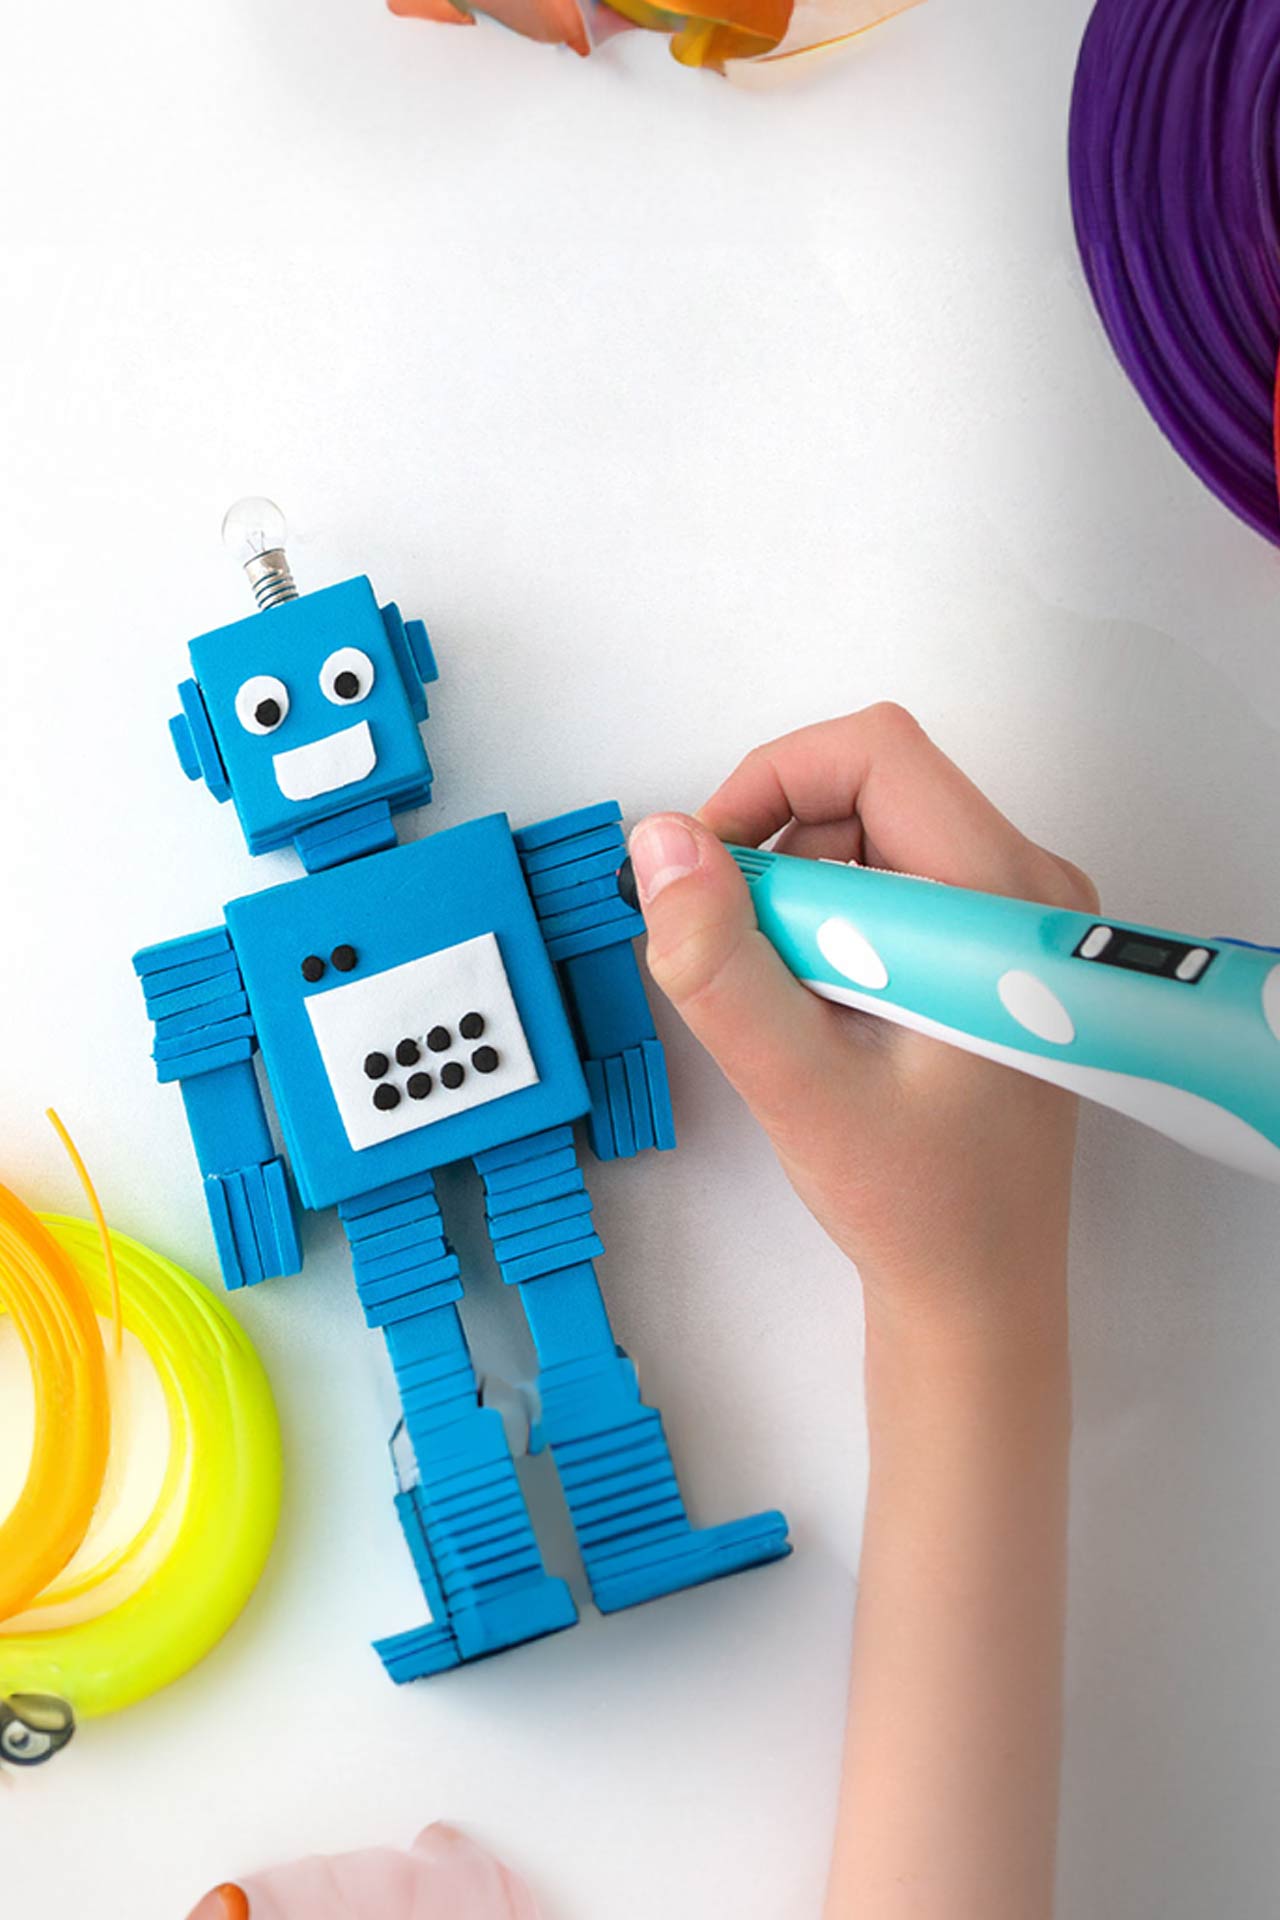 Kid creating robot with 3d pen.